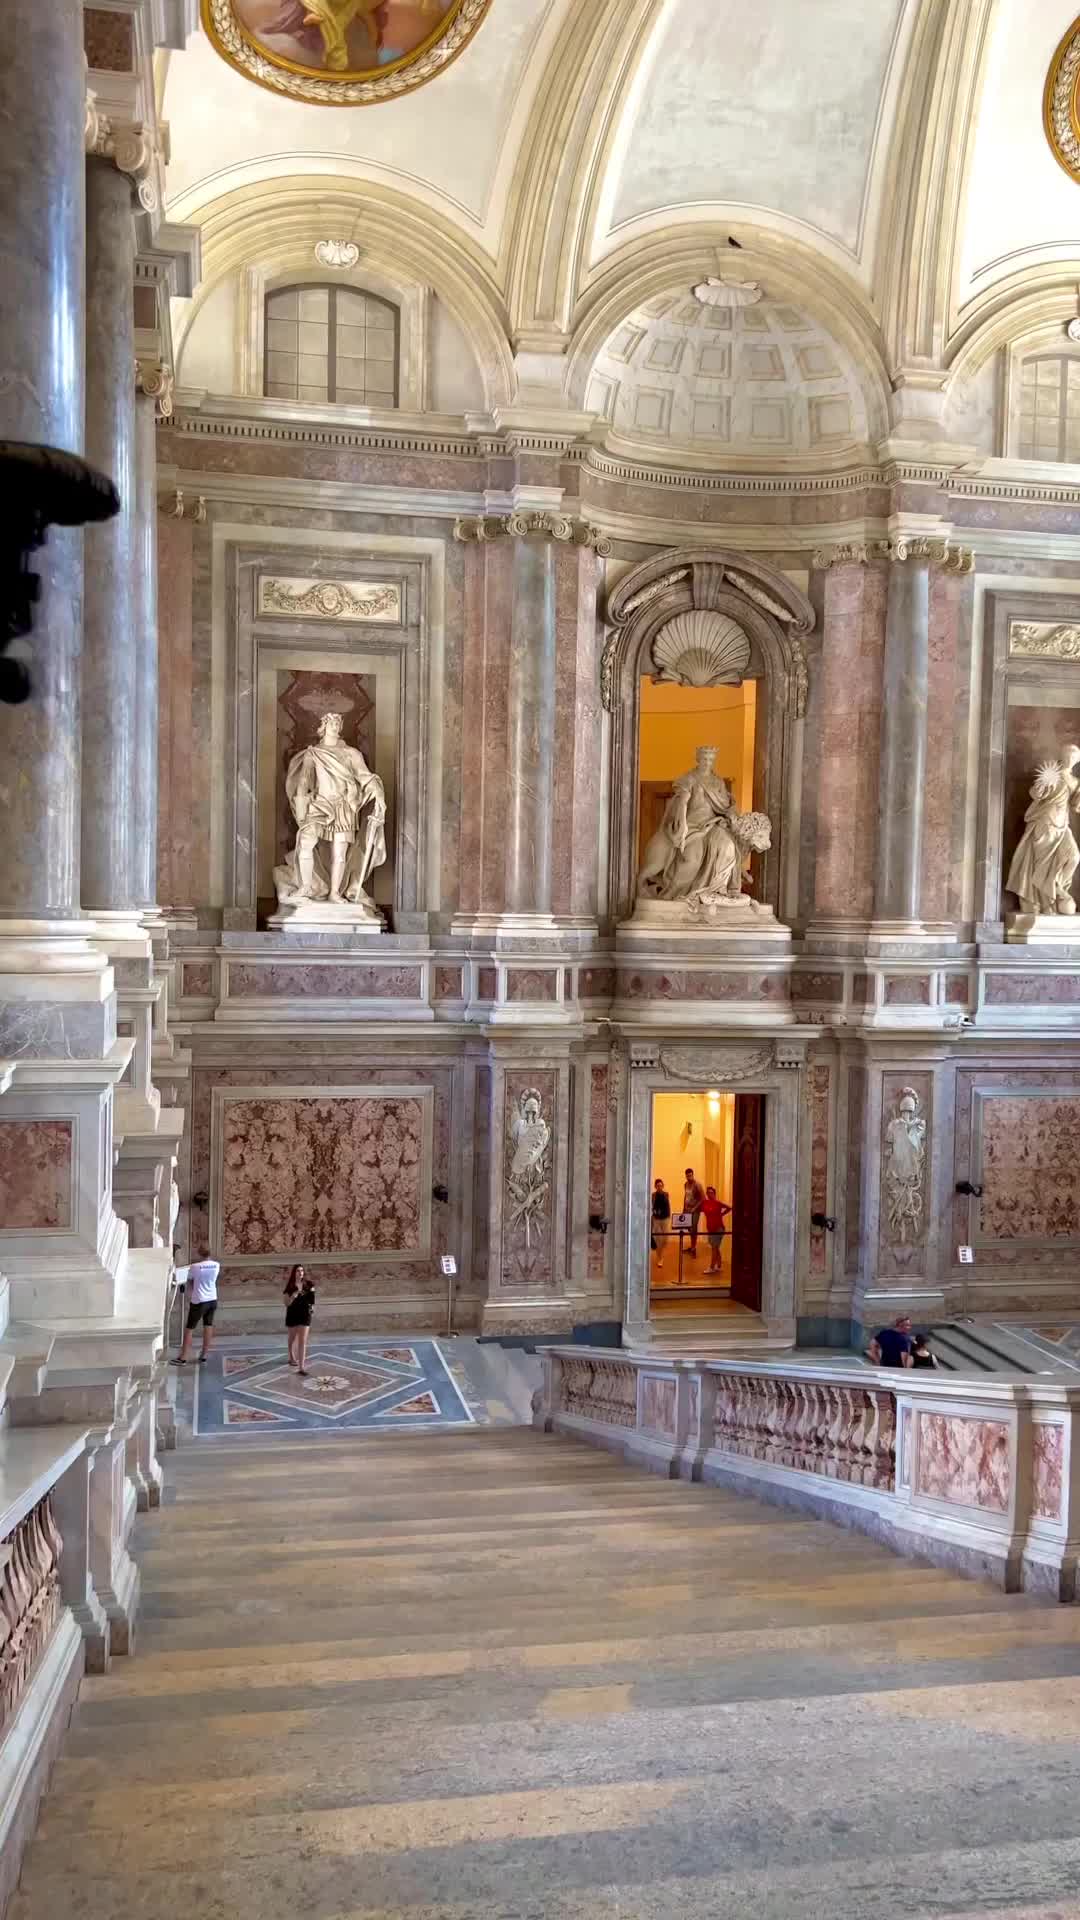 The Grand Staircase of Honour at Caserta's Royal Palace